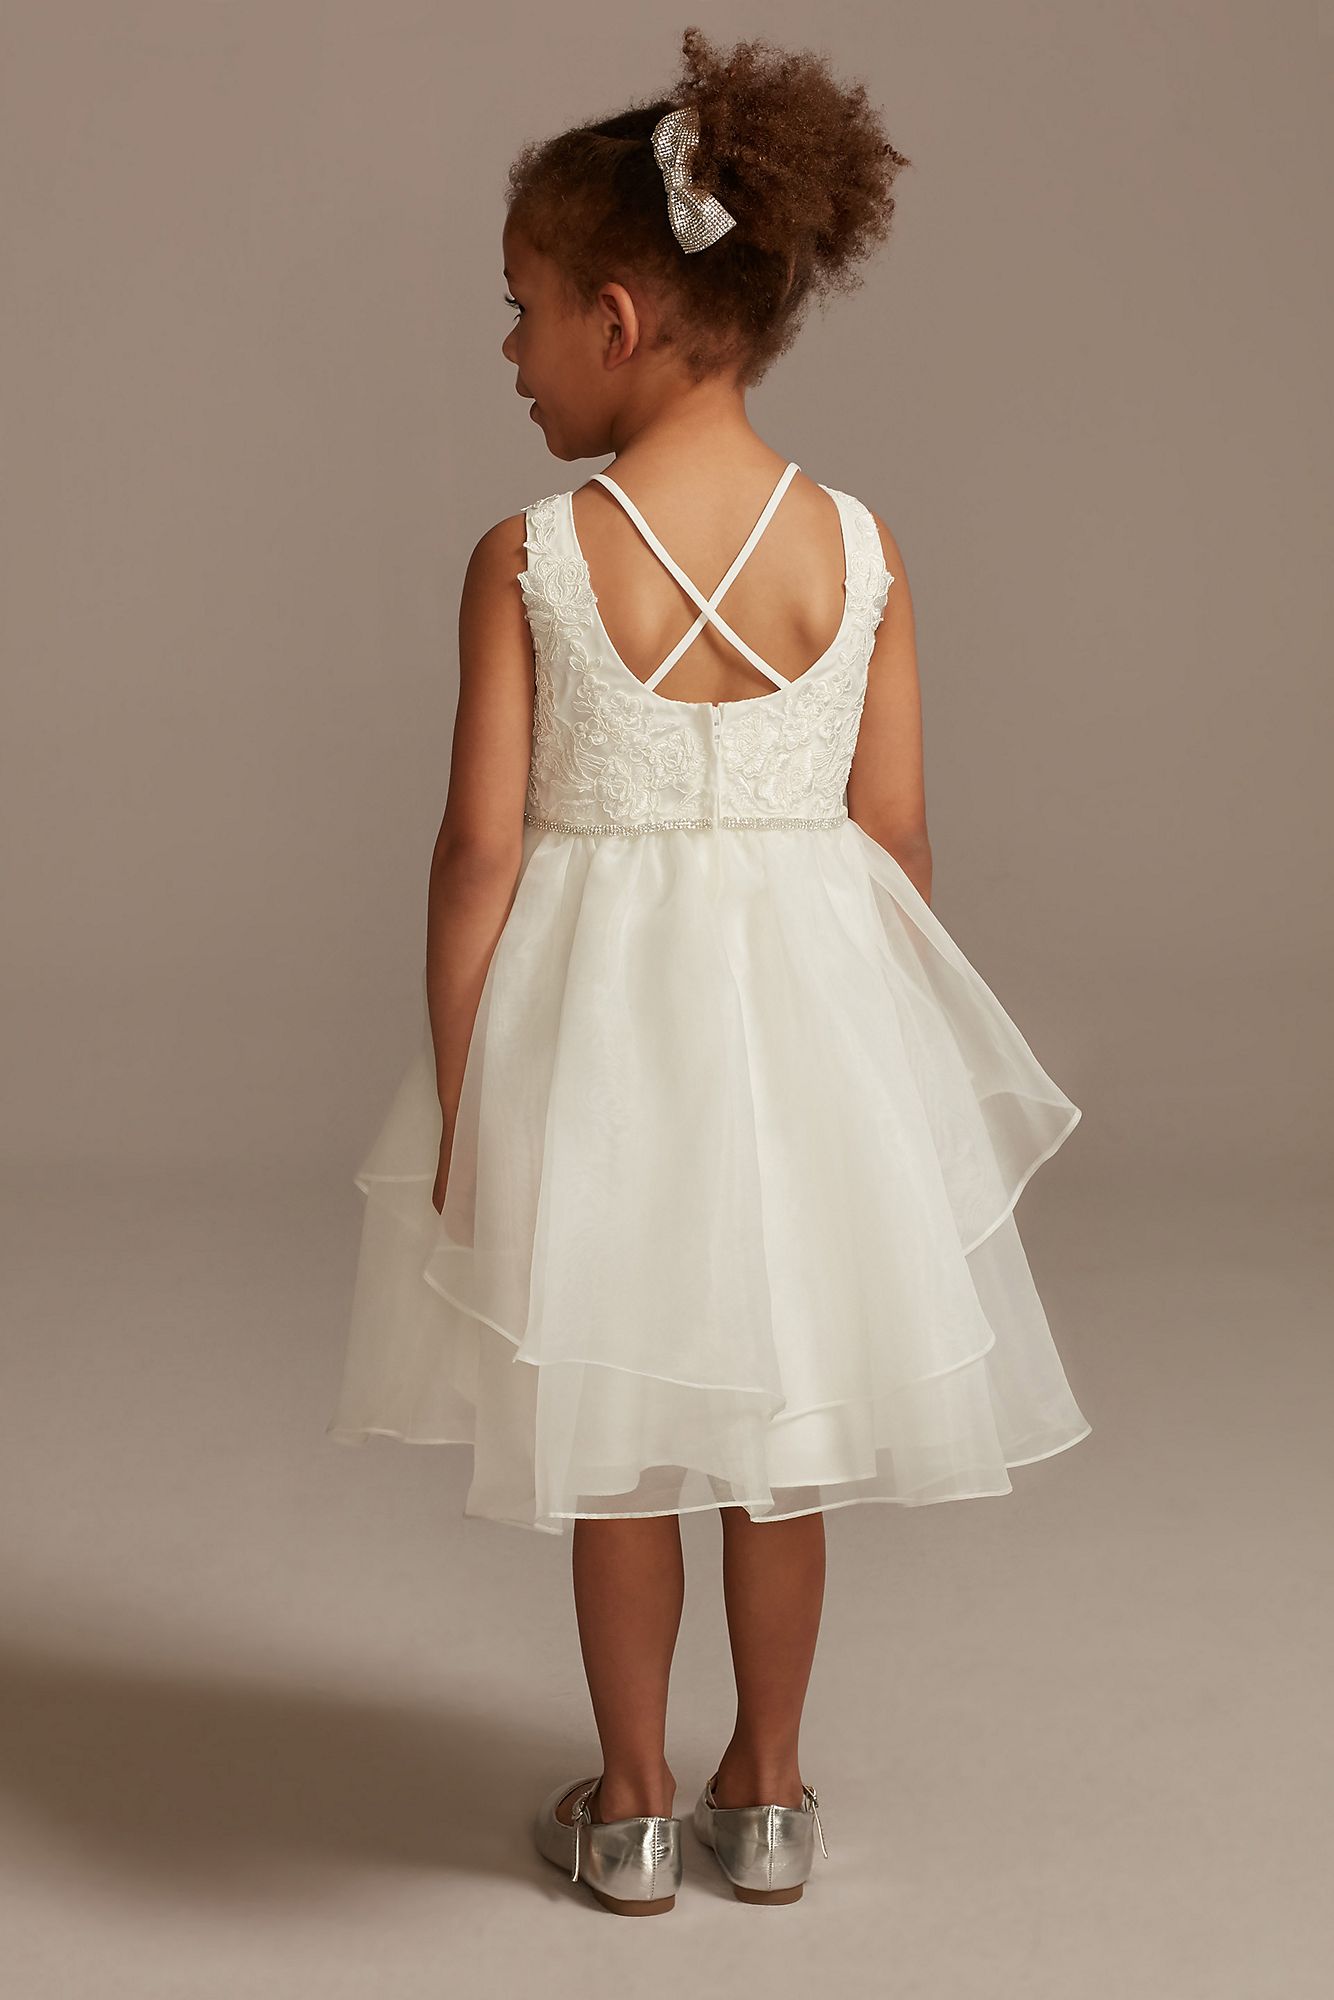 Lace Applique Flower Girl Dress with Tiered Skirt WG1414